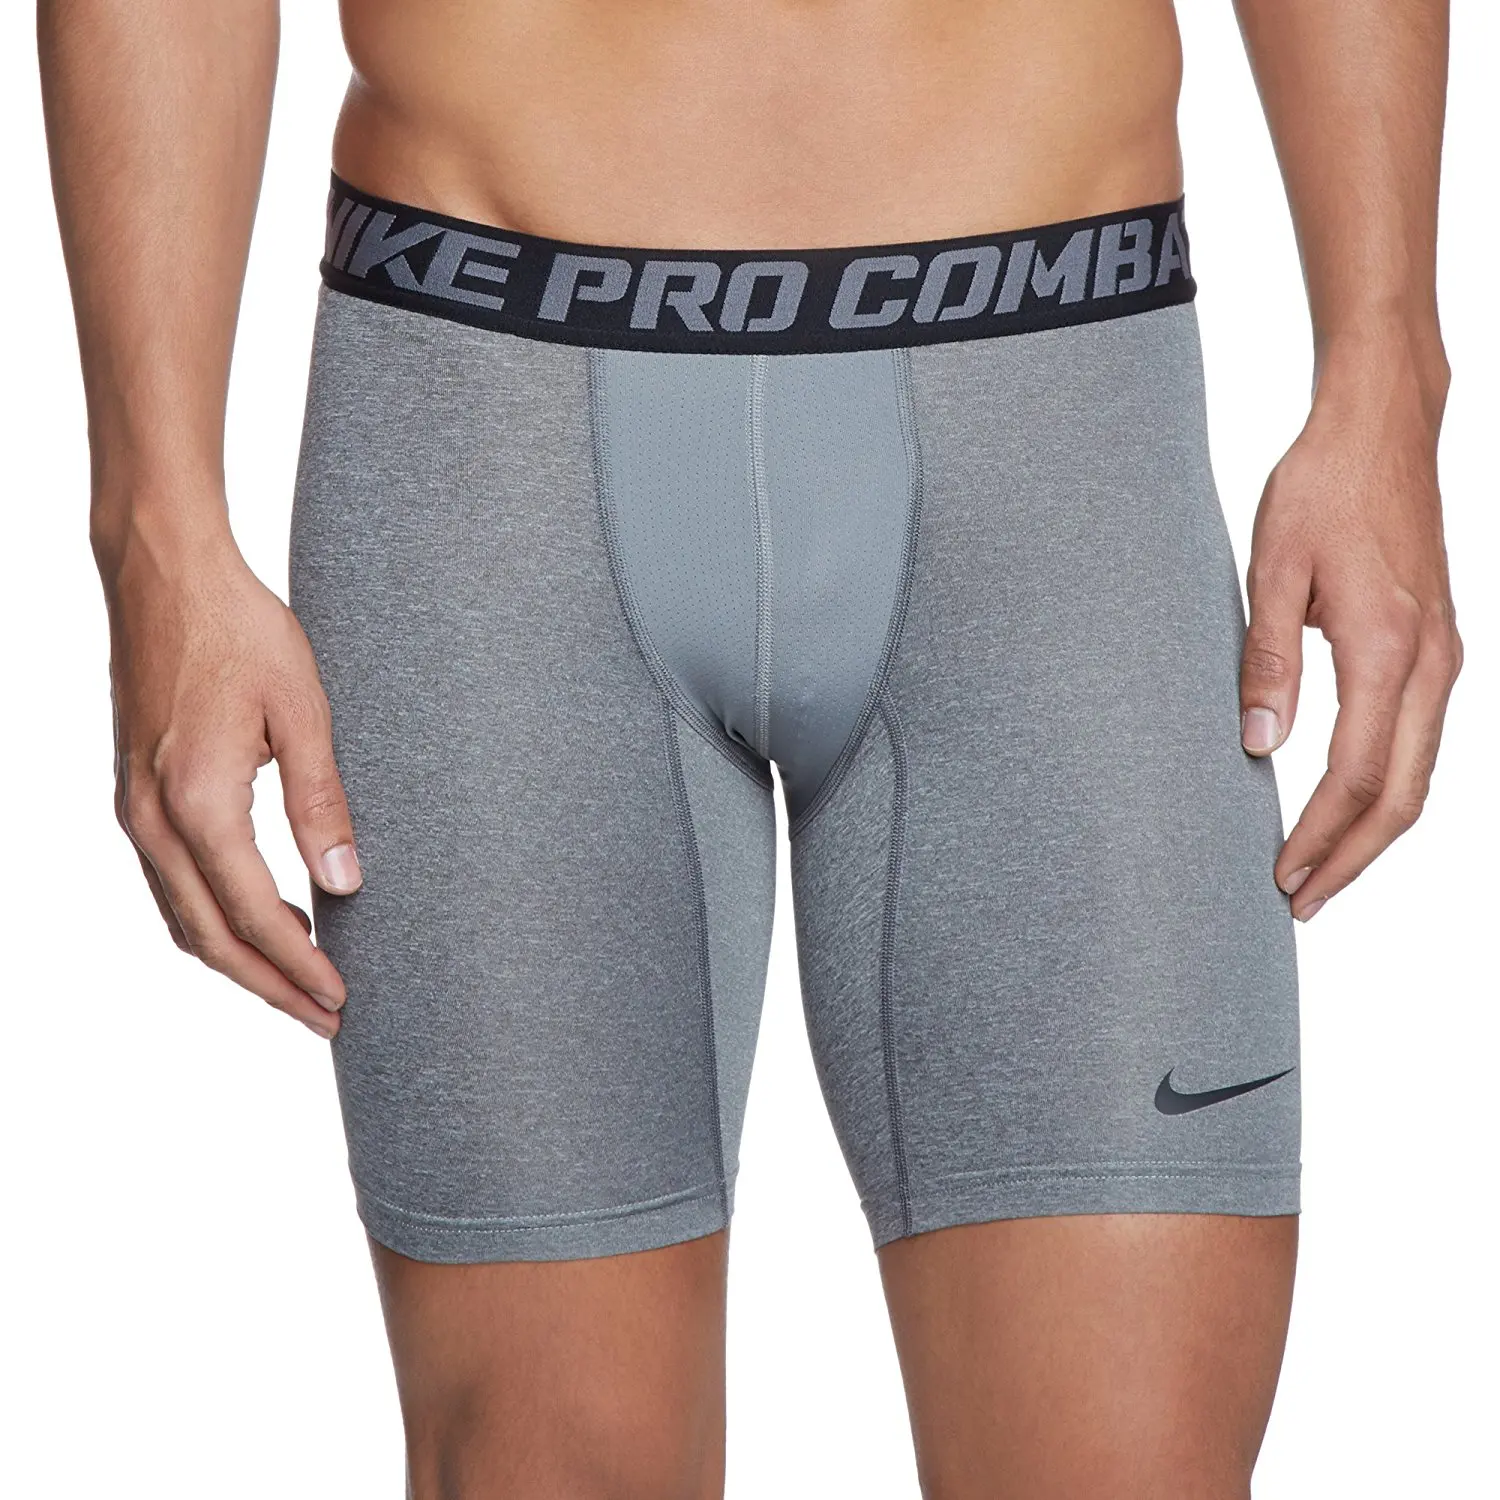 nike 6 inch compression shorts cheap online